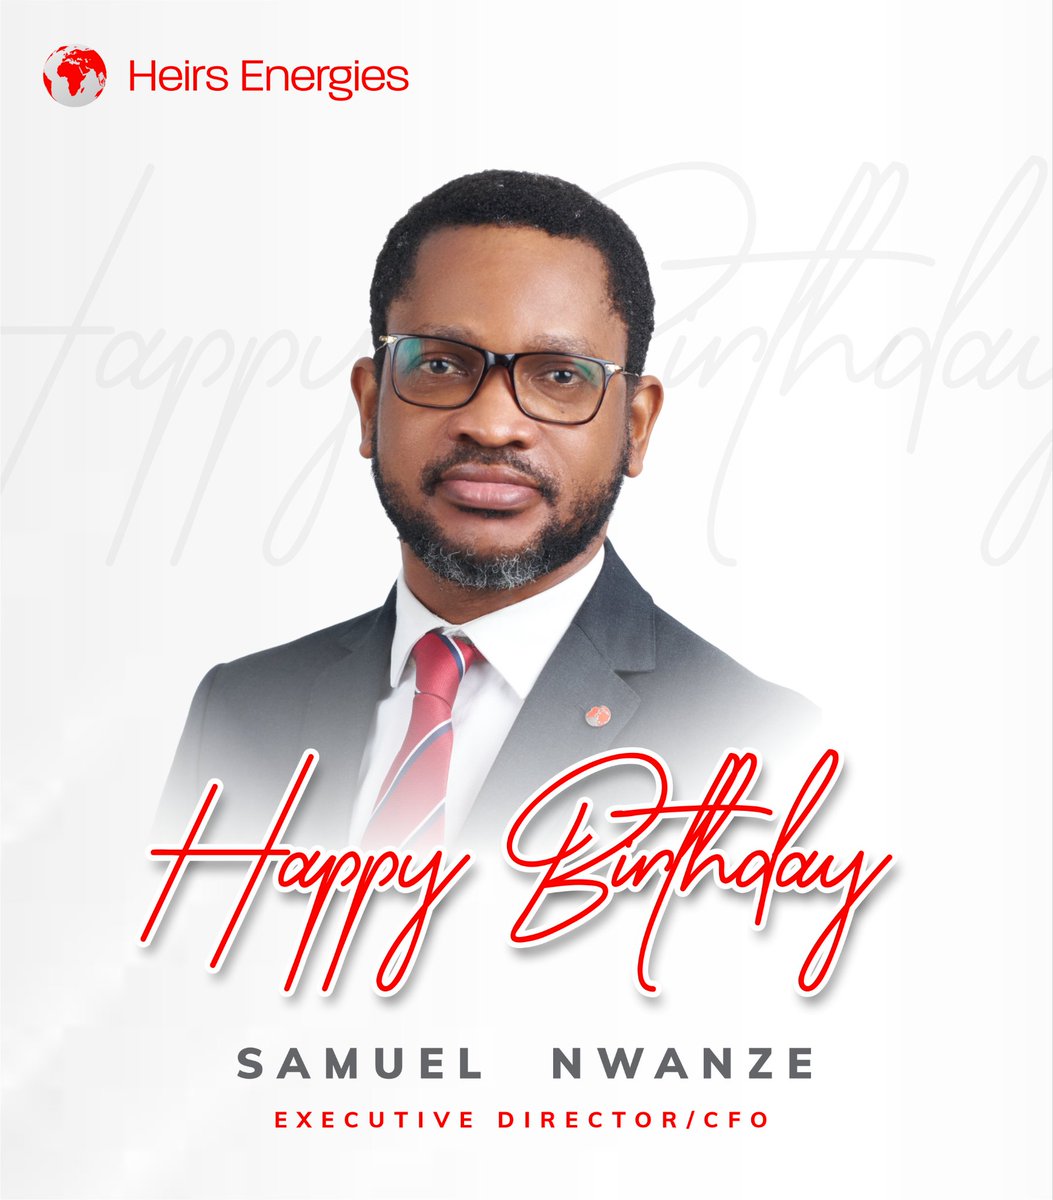 Happy Birthday to our incredible Executive Director/CFO, Sam Nwanze!

Your dedication and hard work inspire us every day. Here's to another year of making a positive impact and achieving great things. 

#HeirsEnergies #HappyBirthday